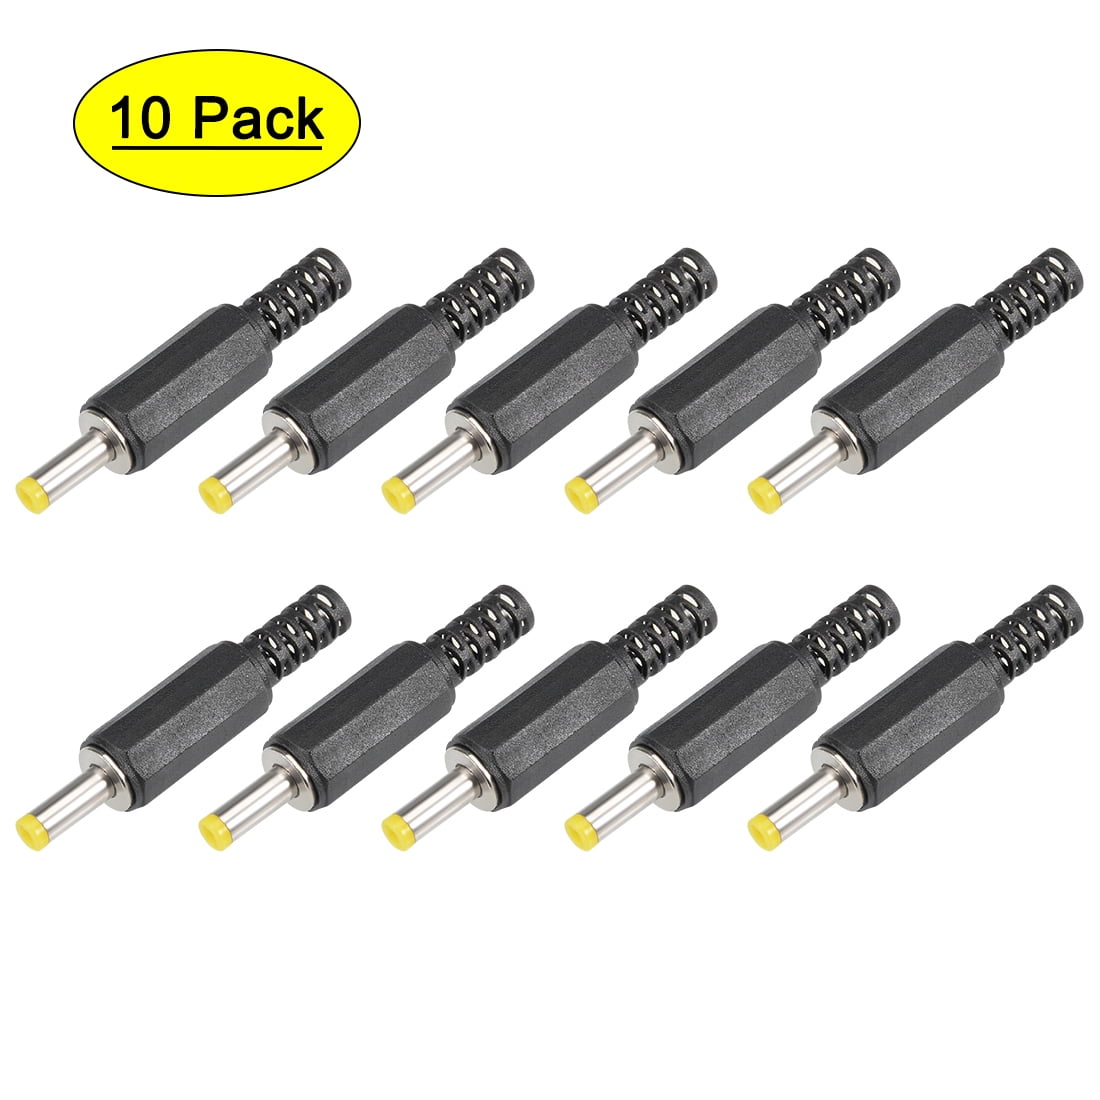 20PCS 9mm x 2.5mm x 0.7mm DC Power Plug Connector cctv Cable for Tablets Charger 